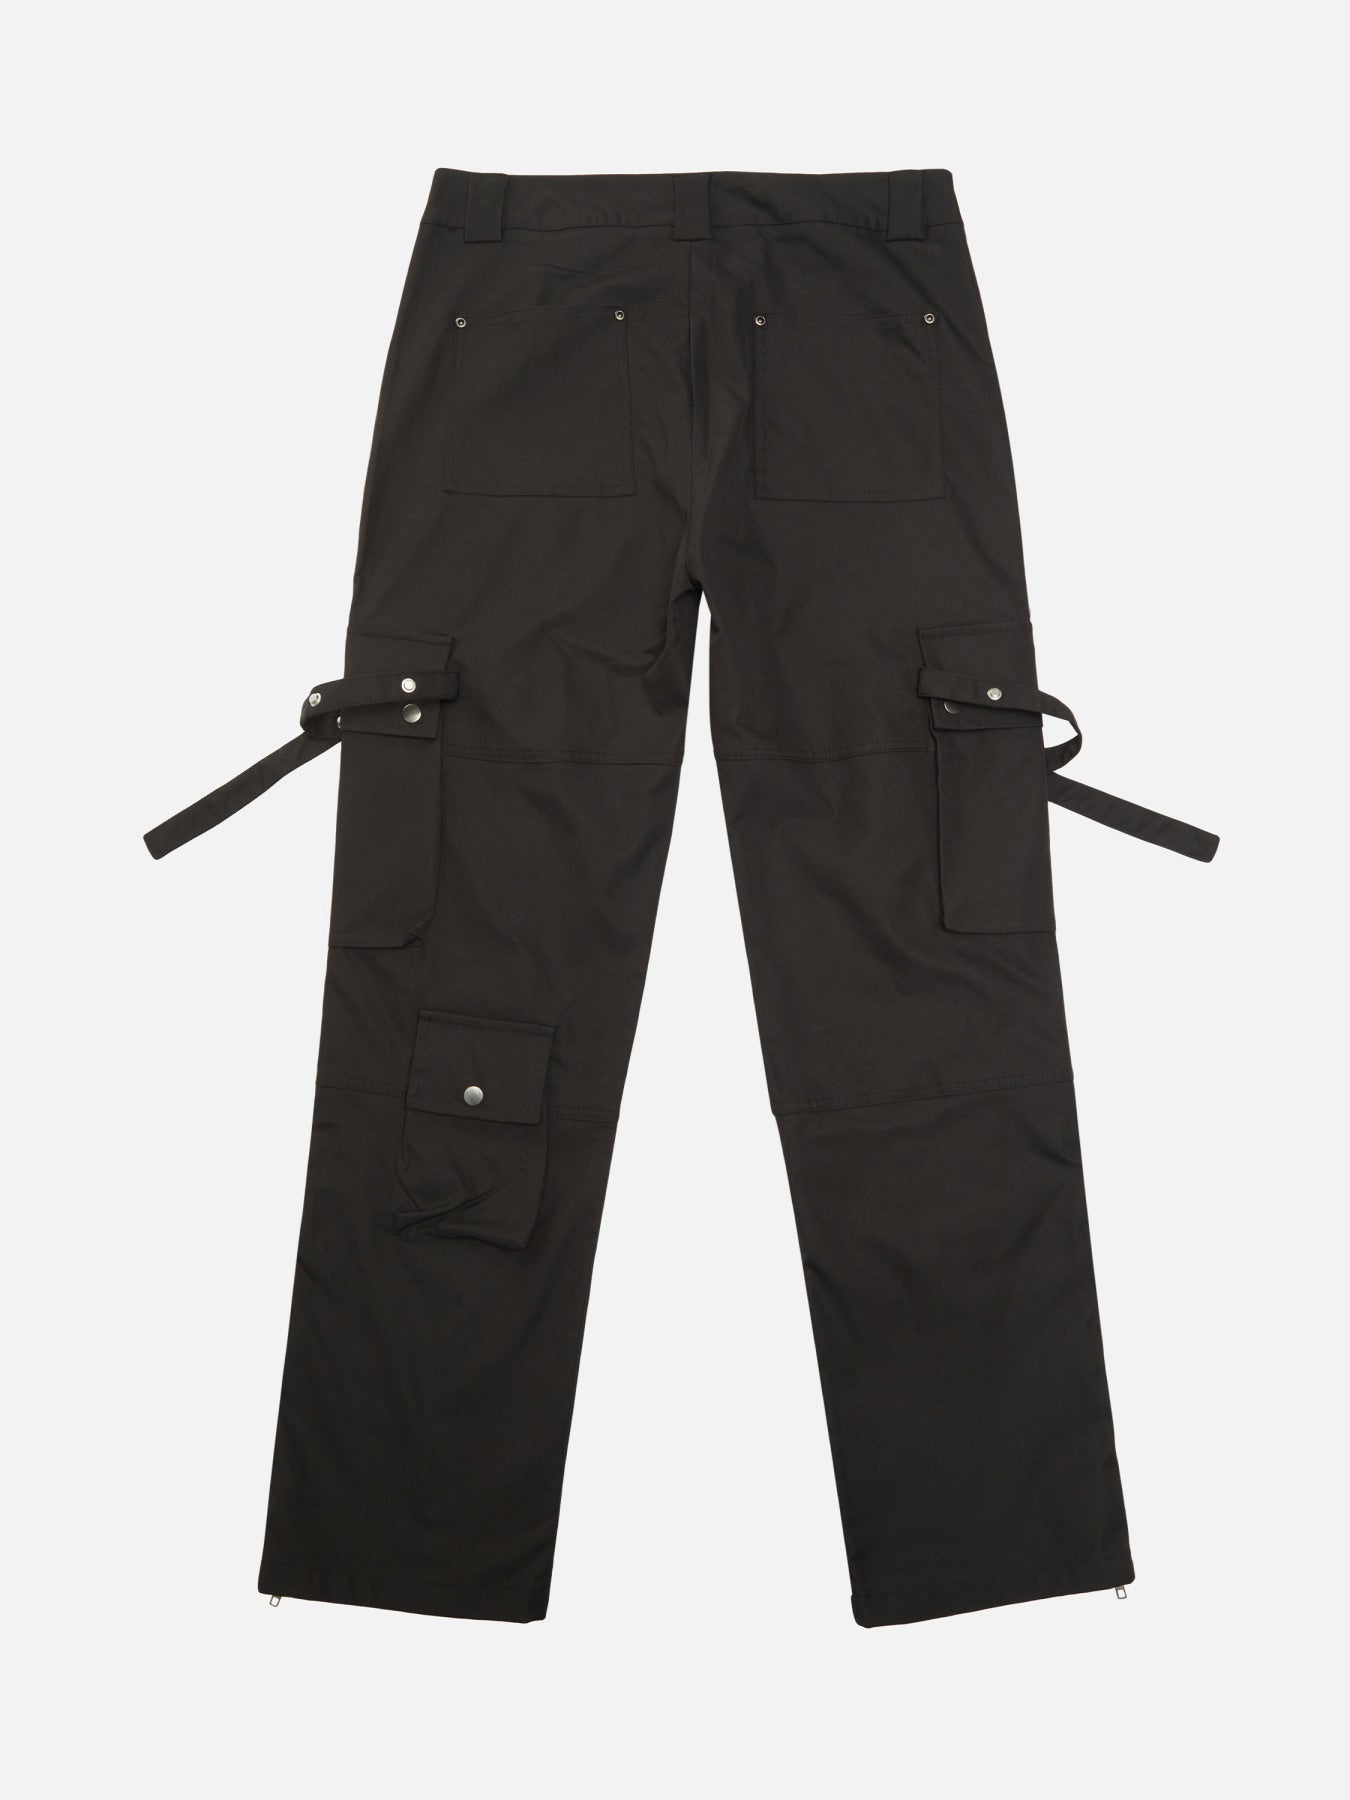 The Supermade Multi-pocket Cargo Pants